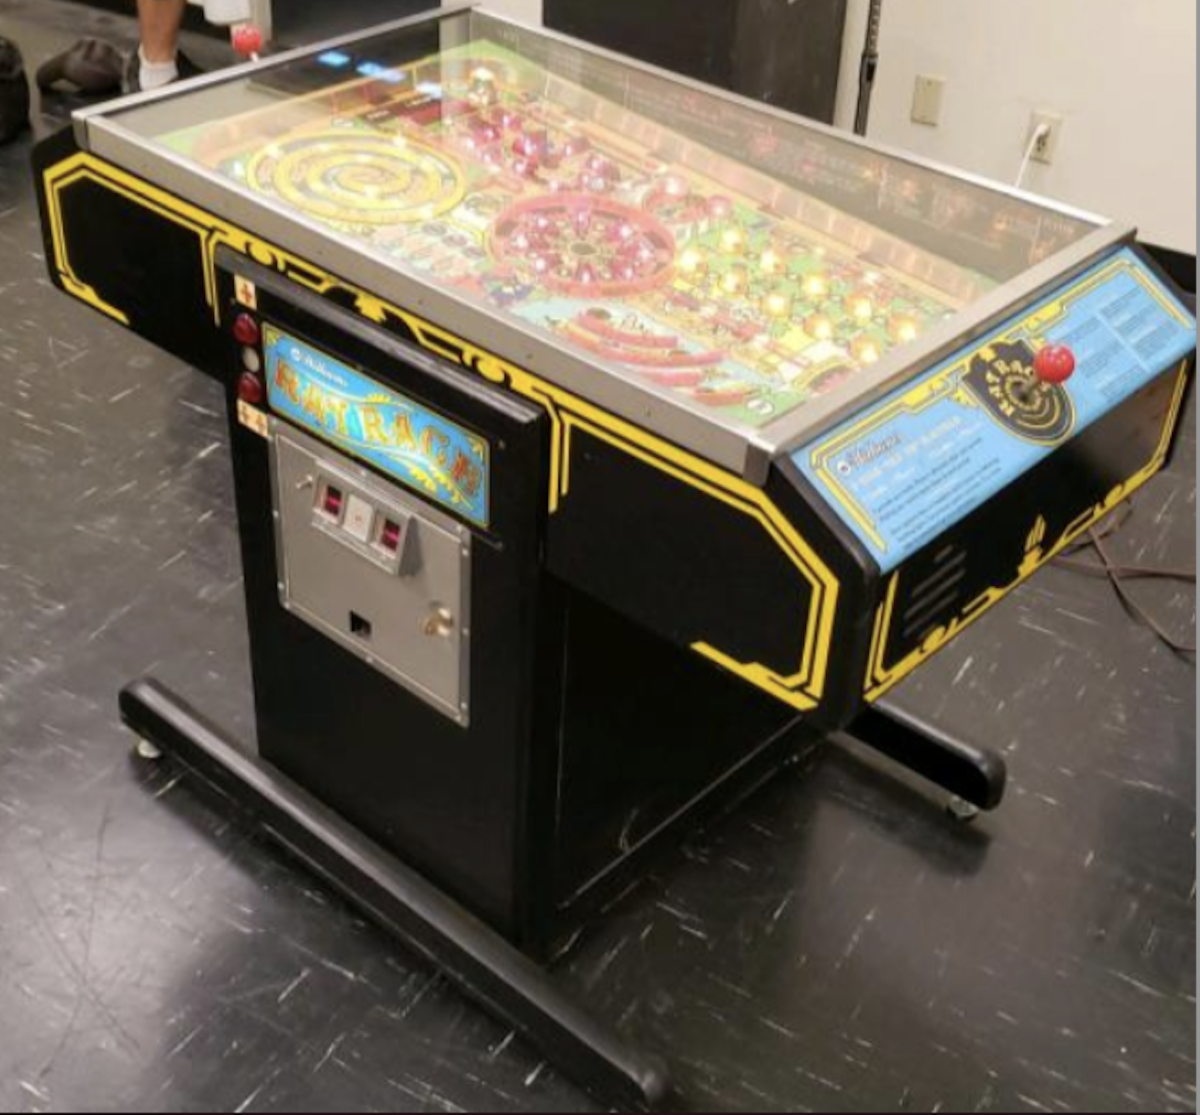 After receiving  84 bids, this rare “Rat Race” pinball game from the Museum of Pinball Collection was the top lot in the auctions, selling for $51,493.